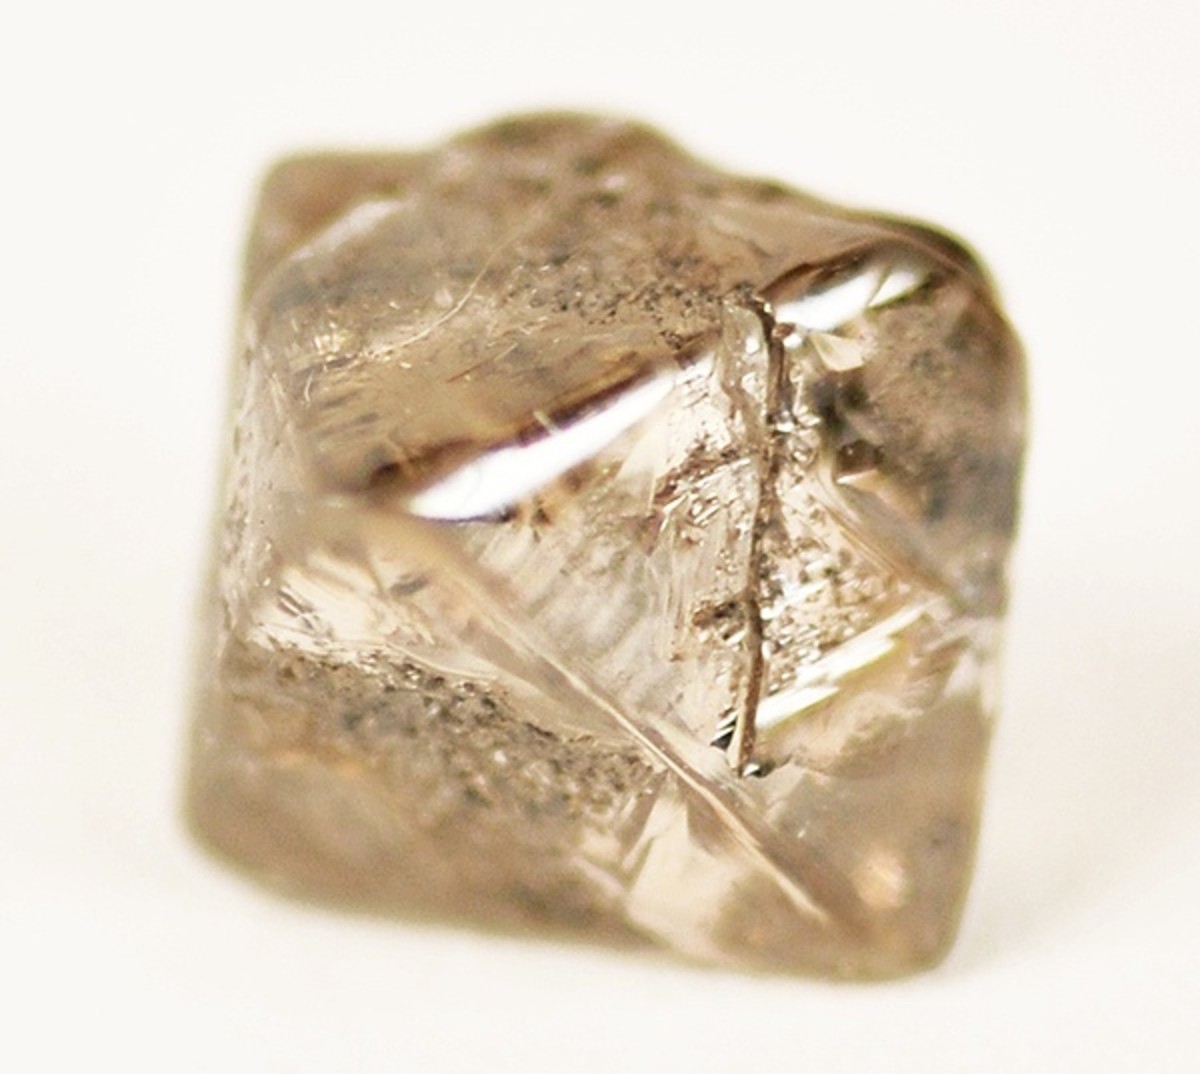 Colored Diamond from the Argyle Mine in Western Australia